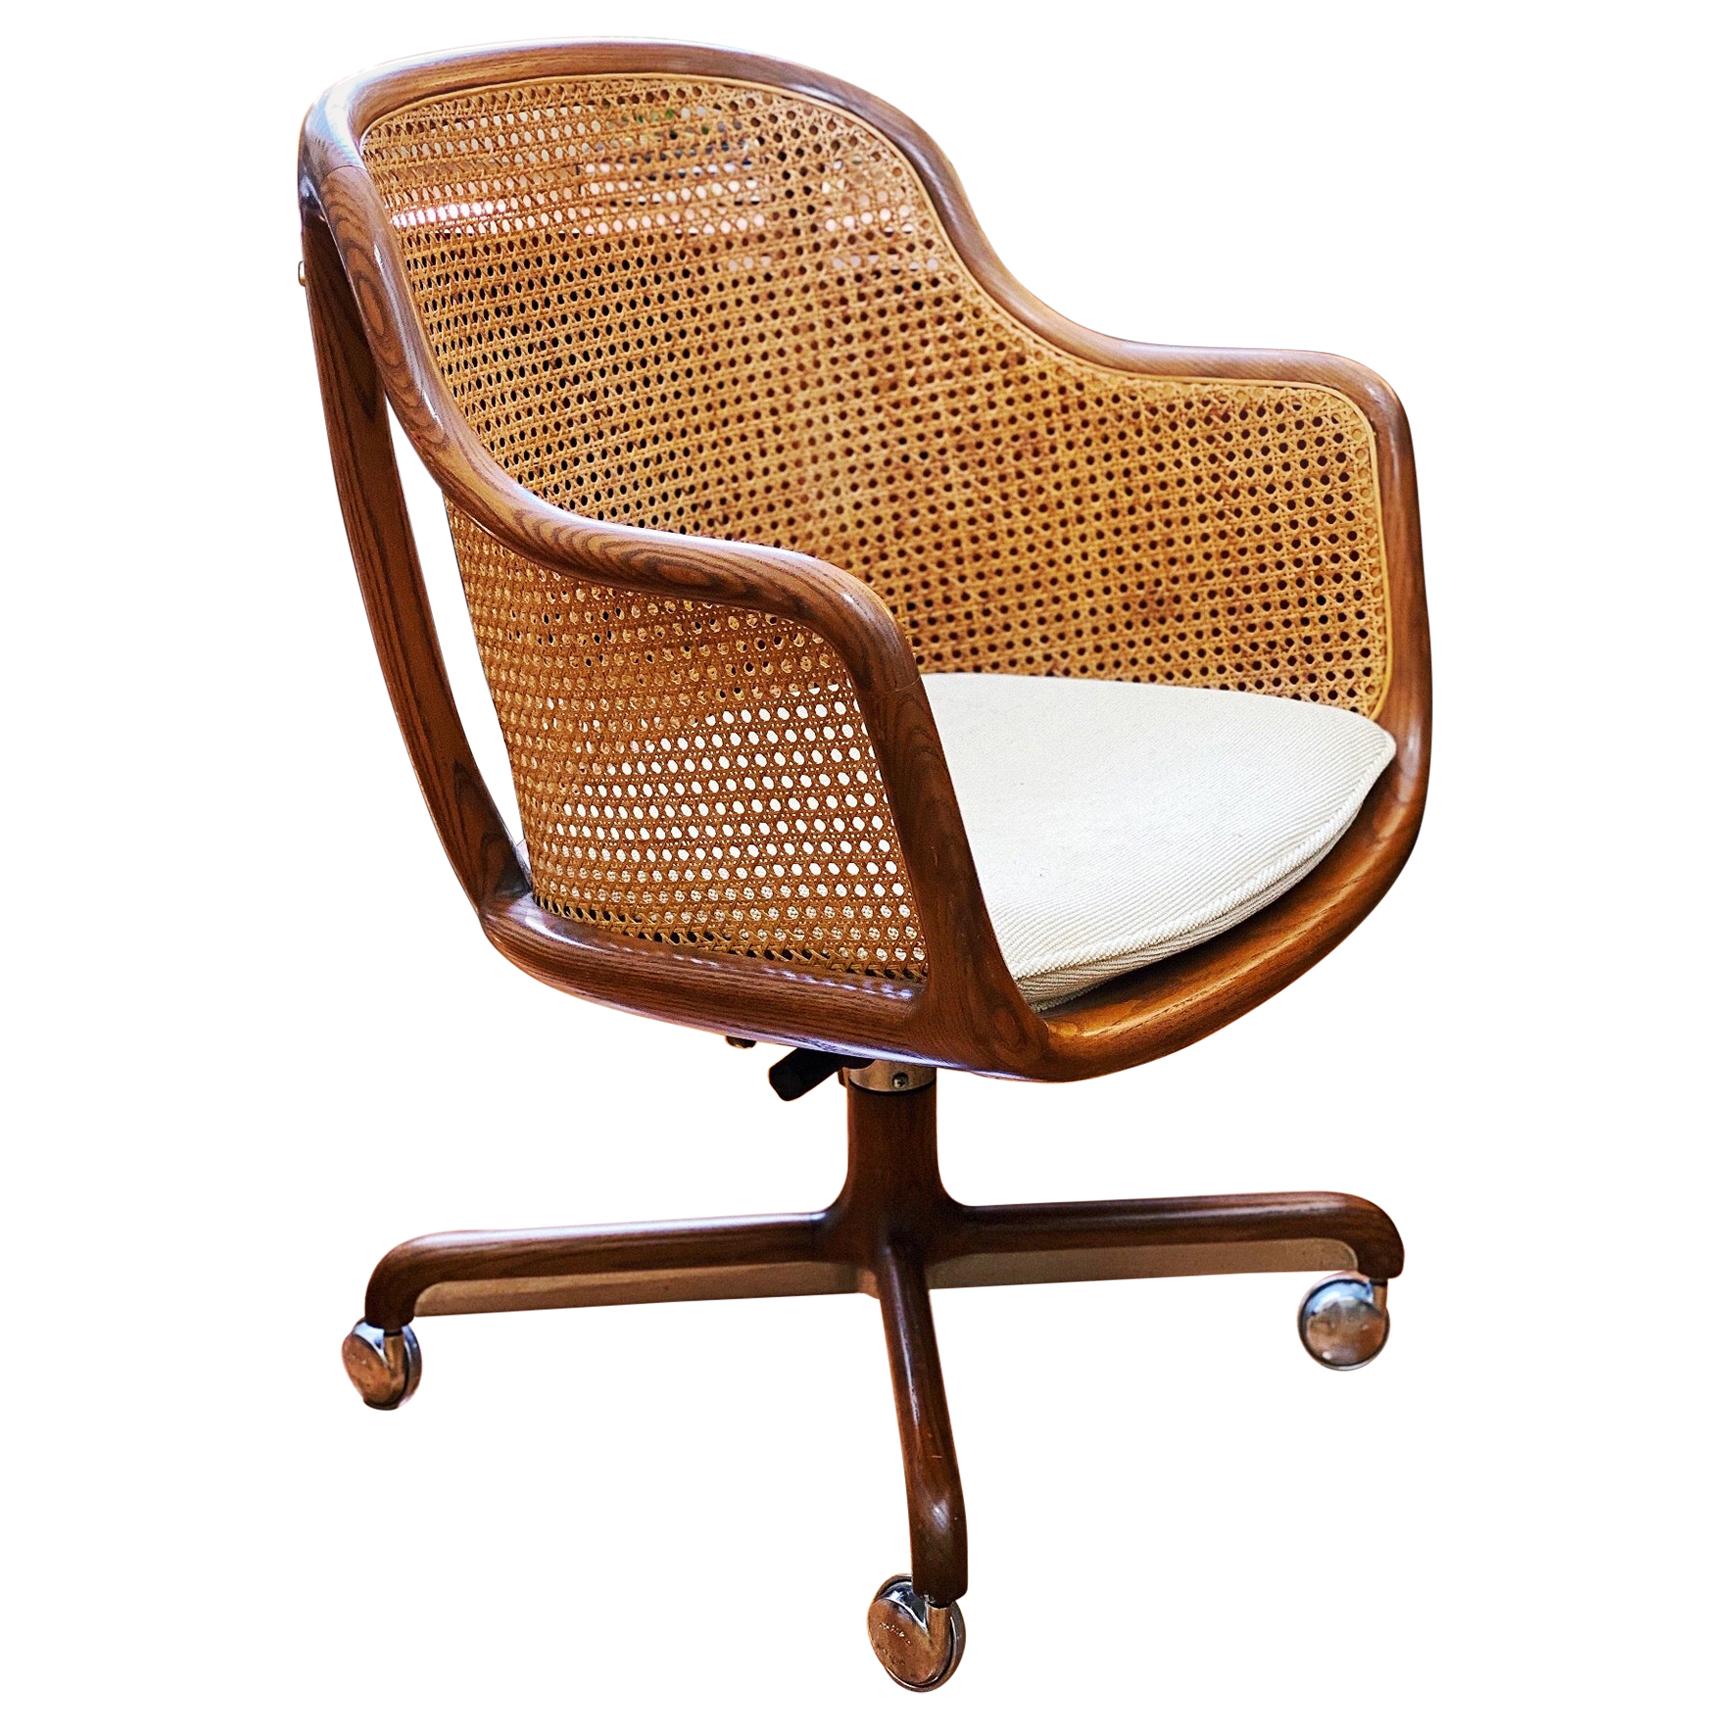 Vintage Sculptural Ash and Cane Desk Chair by Ward Bennett for Brickel Assoc.